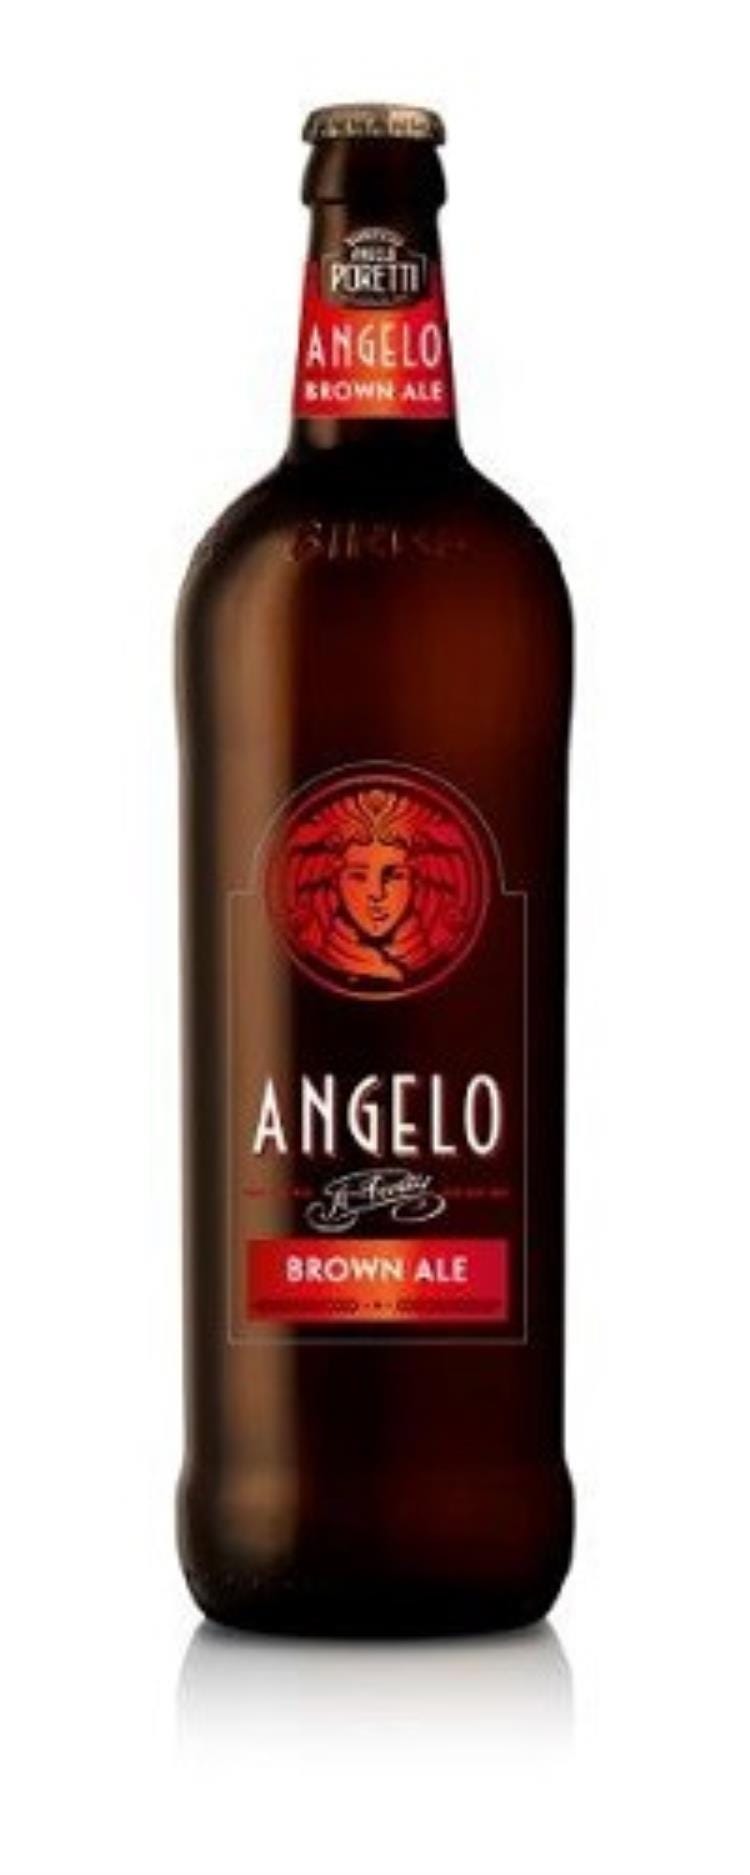 Angelo - Brown Ale